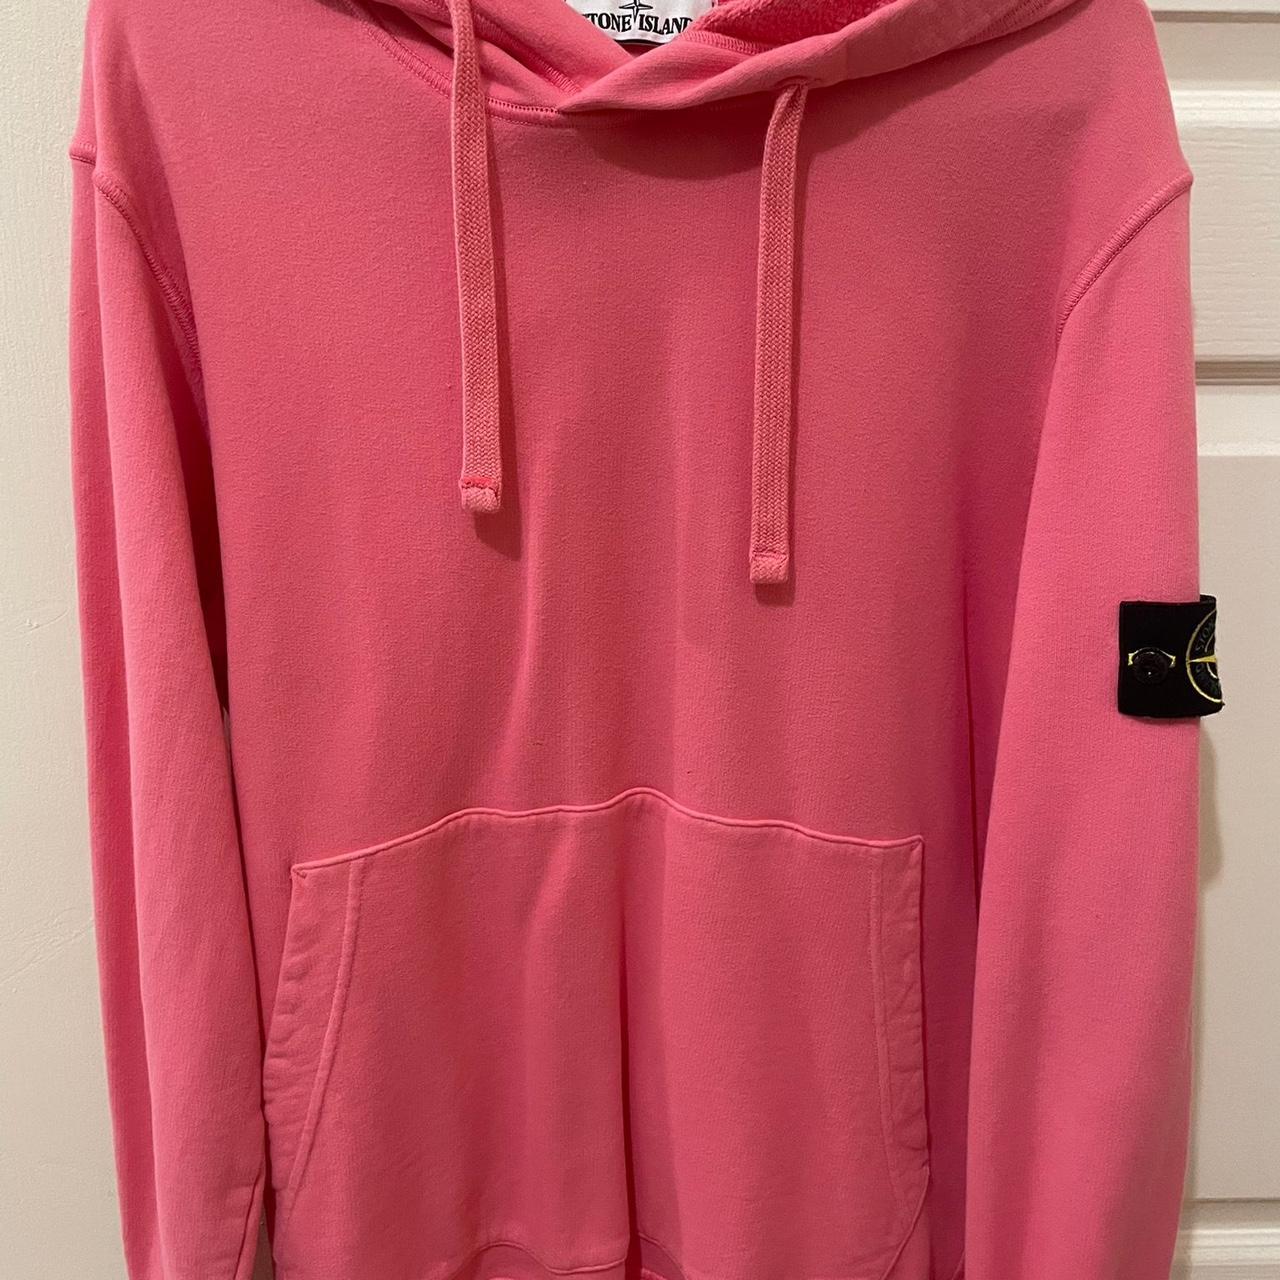 stone island hoodie pink, size large worn once’s and... - Depop